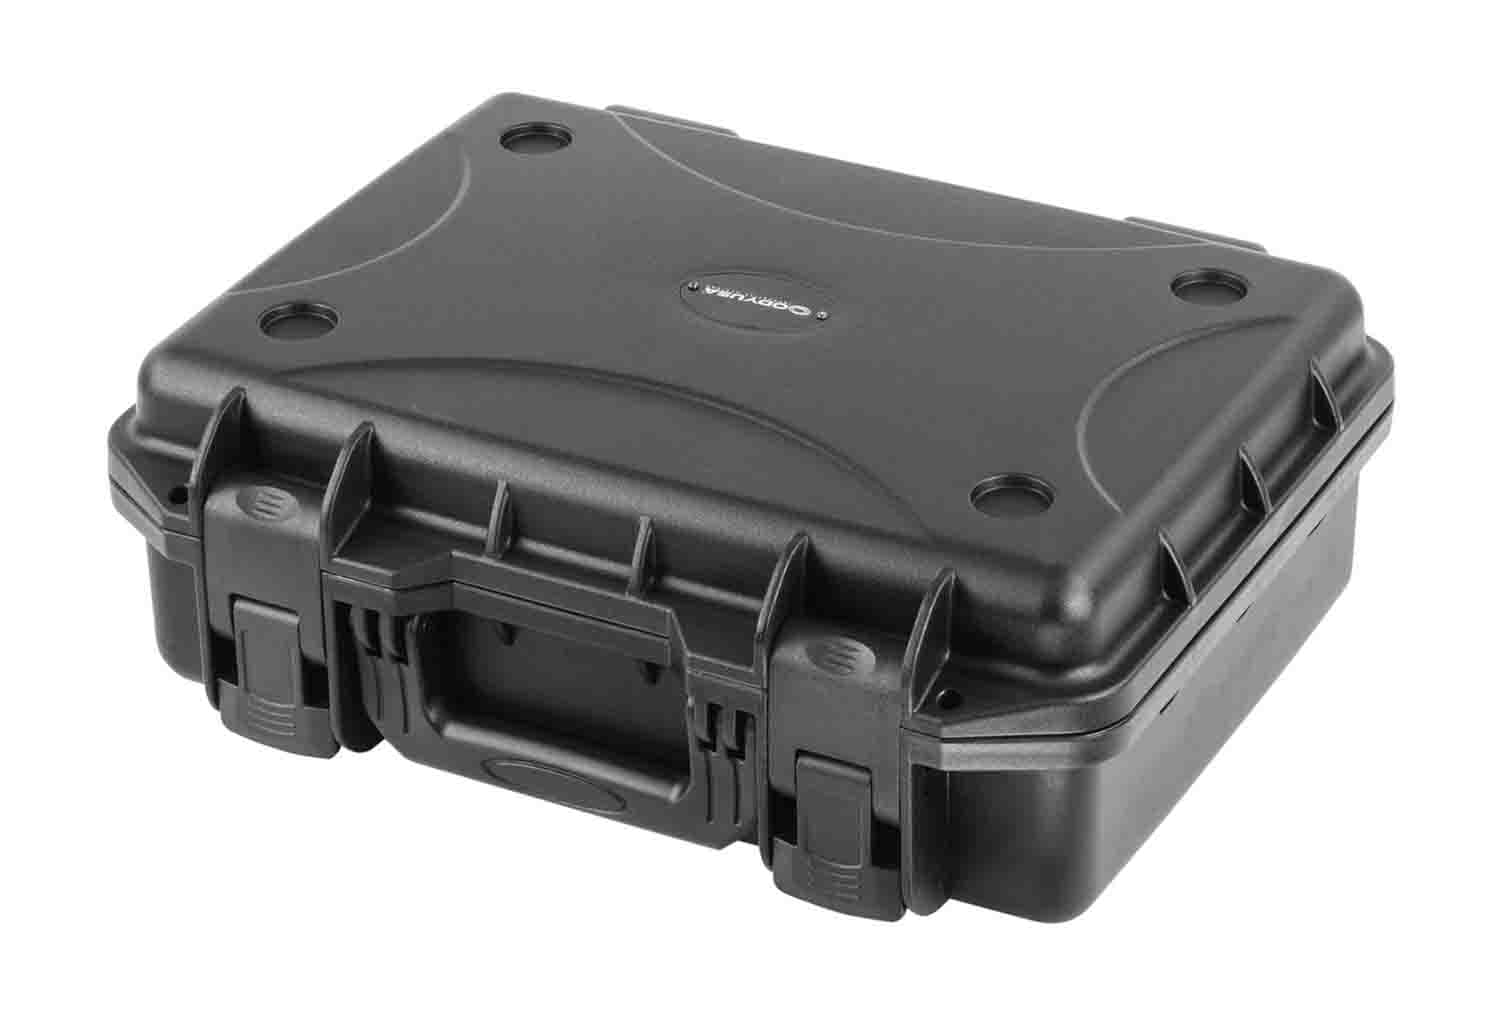 Odyssey VU151005NF Vulcan Injection-Molded Utility Case - 15.25 x 10.5 x 3.5" Interior - Hollywood DJ